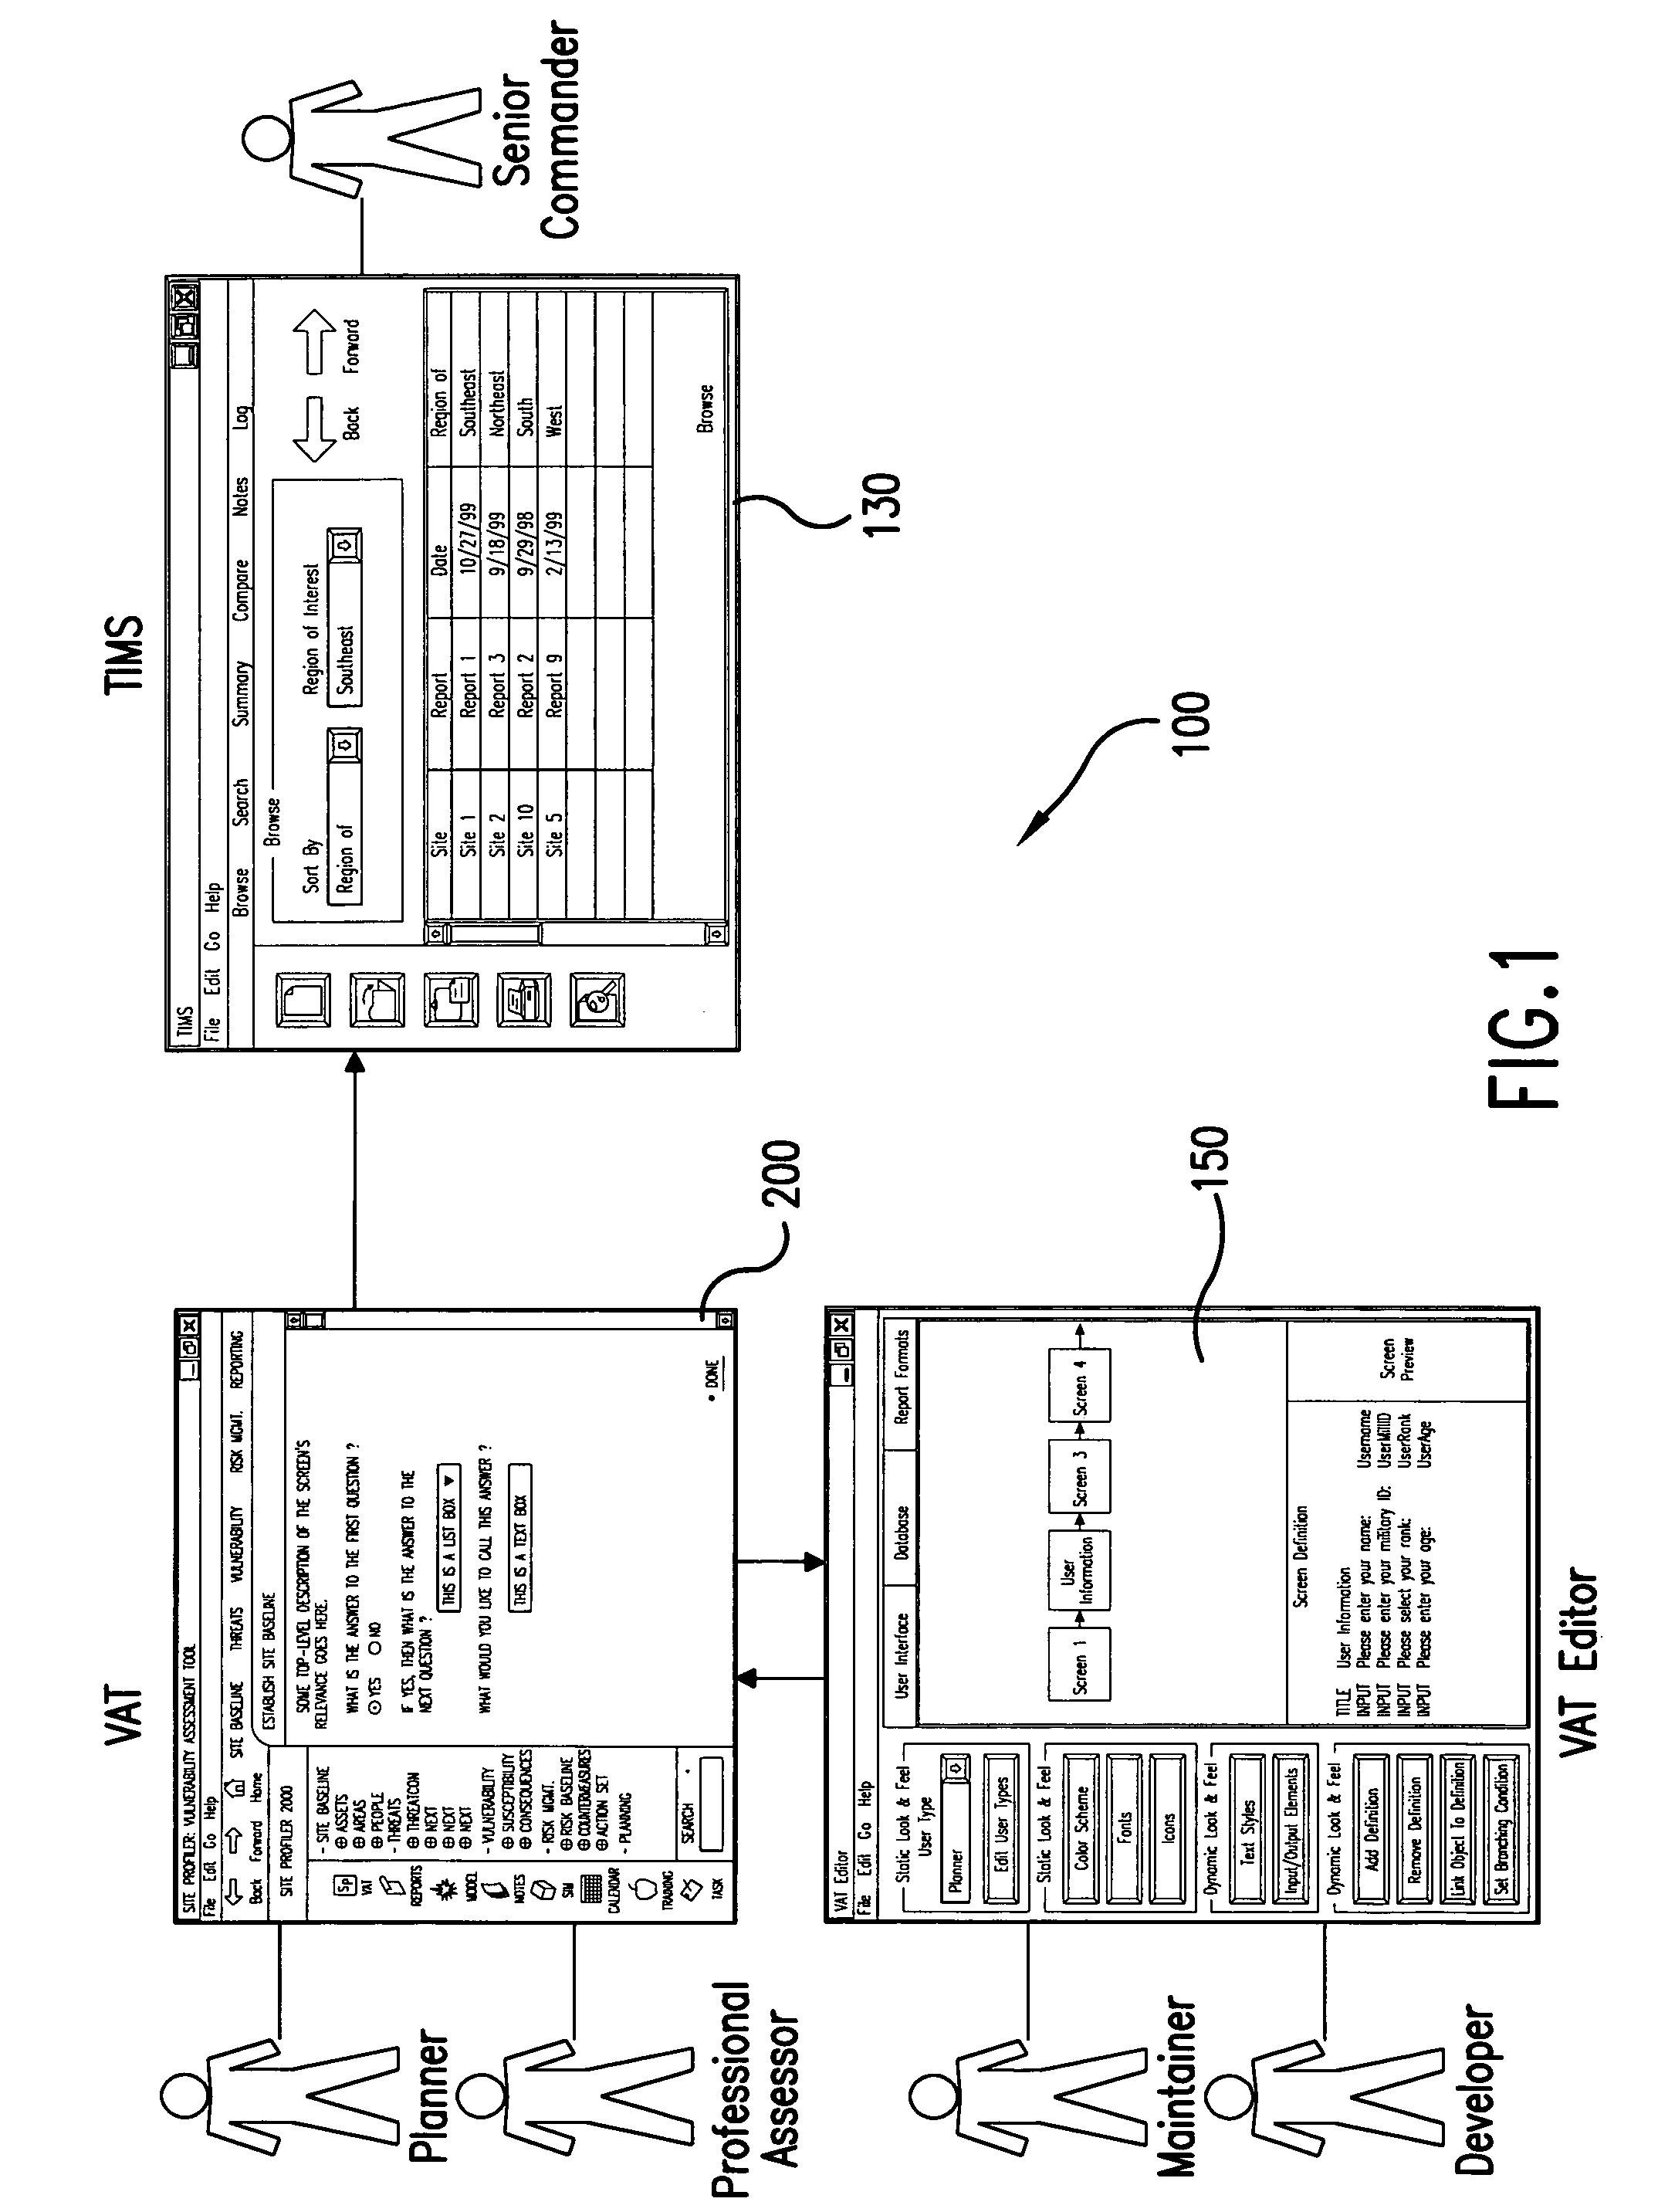 Method and apparatus for risk management